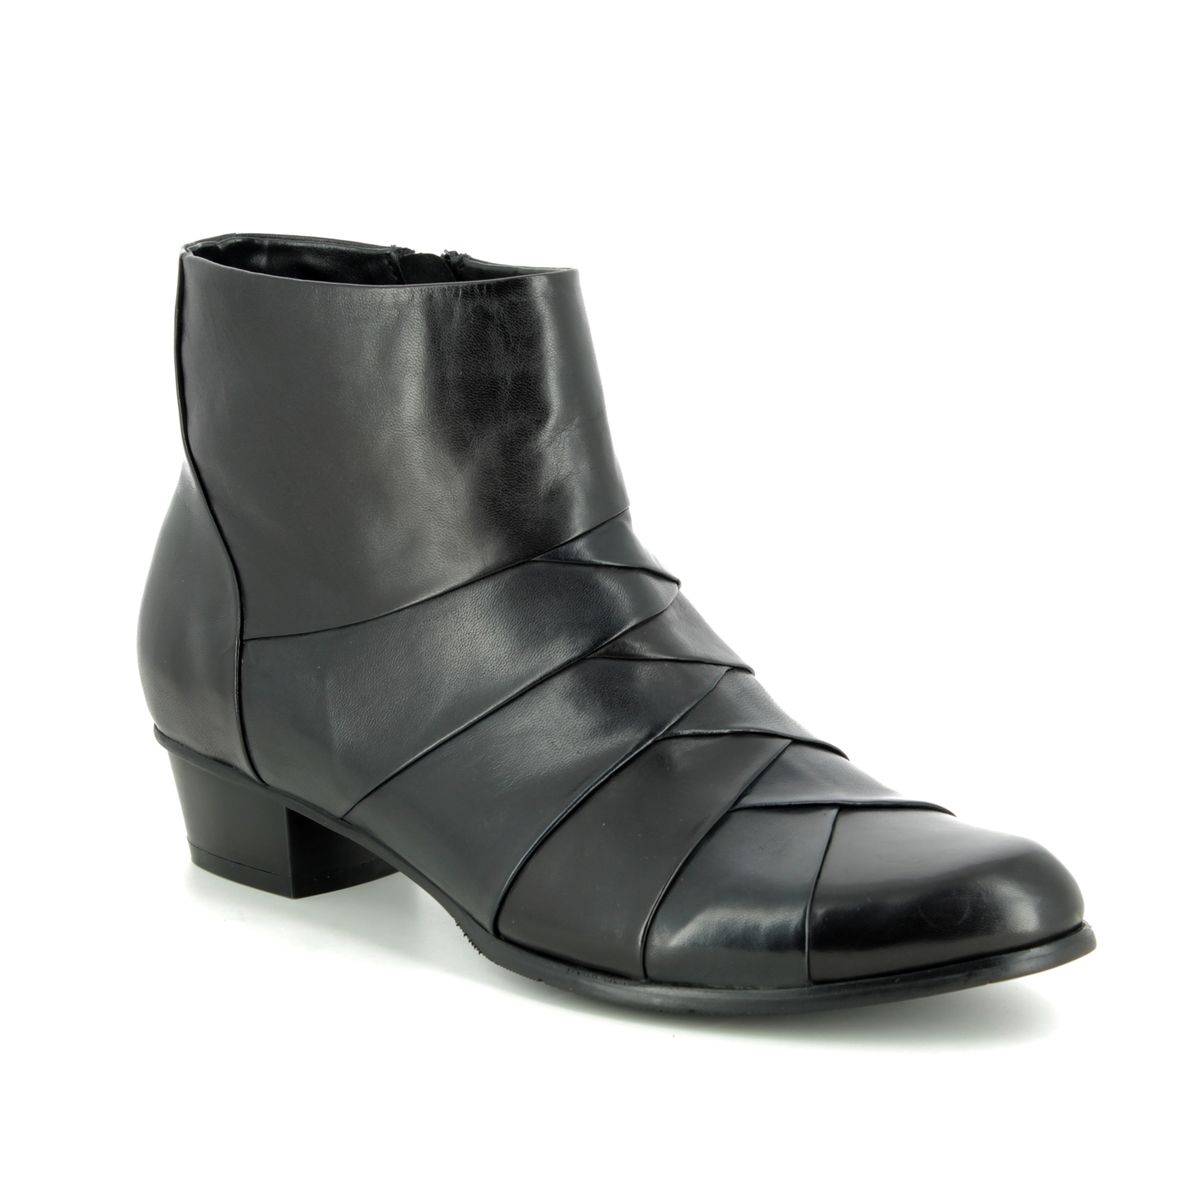 Regarde Le Ciel Stefany 172 Black Navy Womens Boots 9118-30 Ankle Boots In Soft Black Navy Leather In Size 38